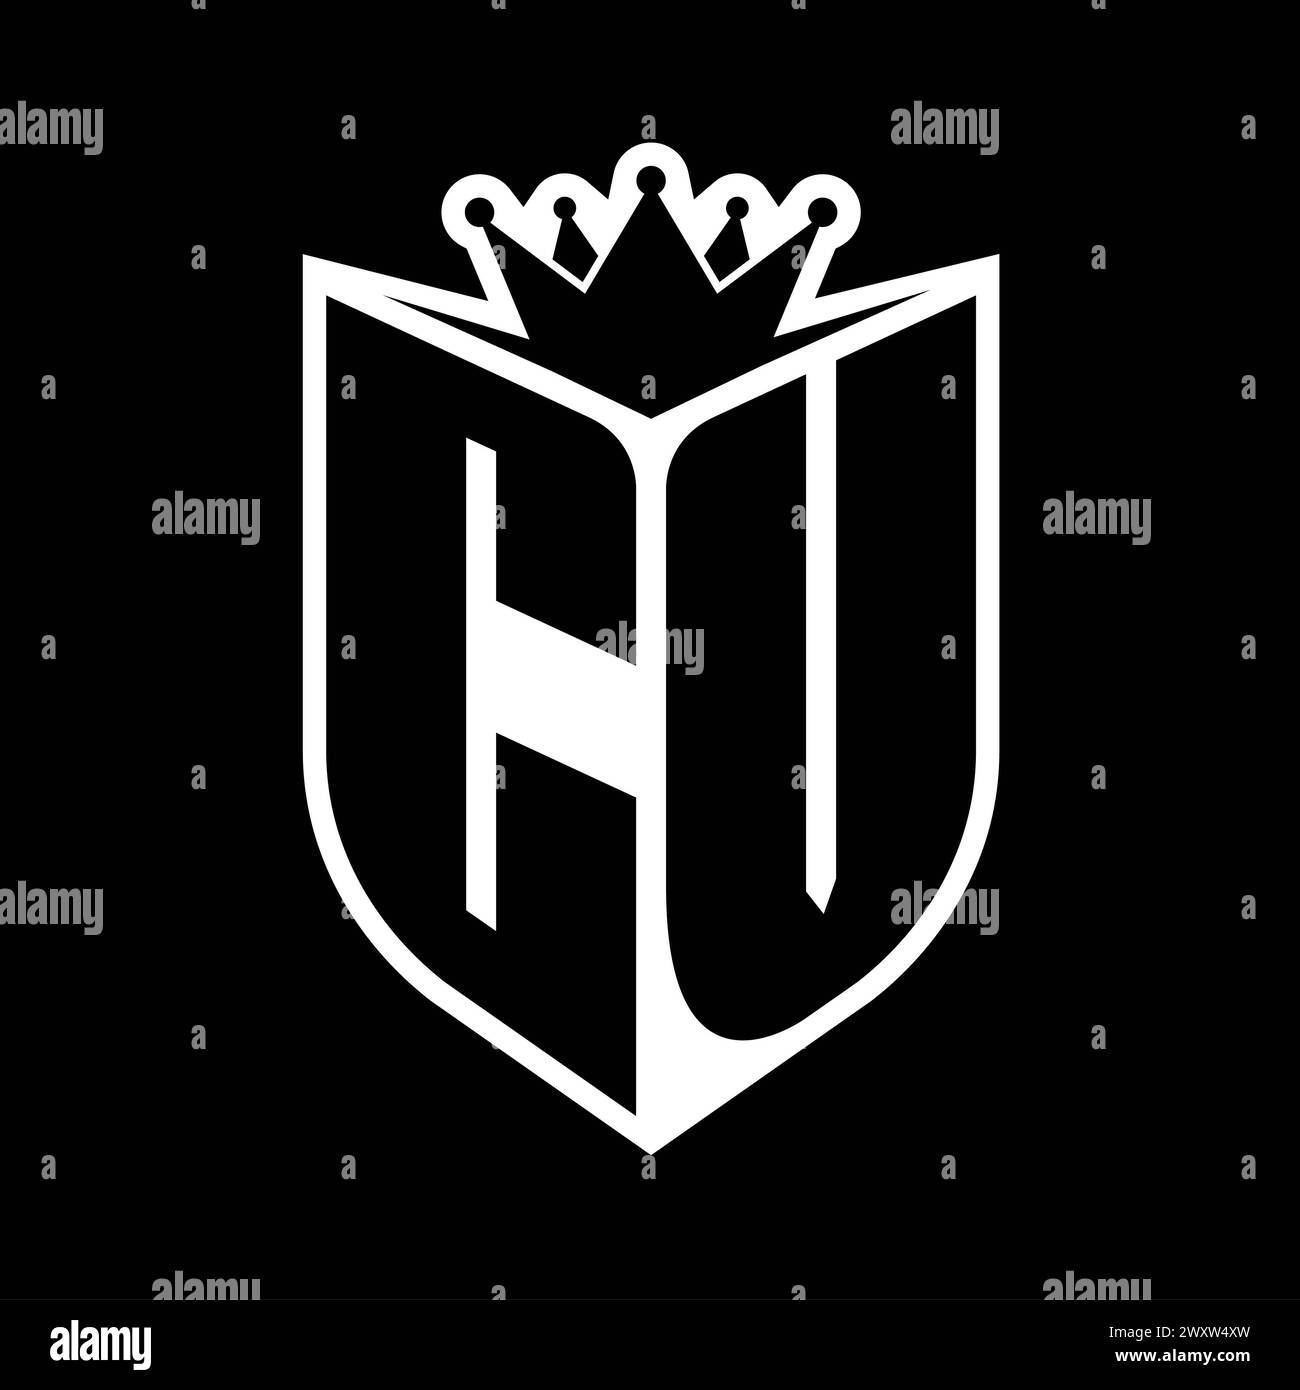 CV Letter bold monogram with shield shape and sharp crown inside shield black and white color design template Stock Photo